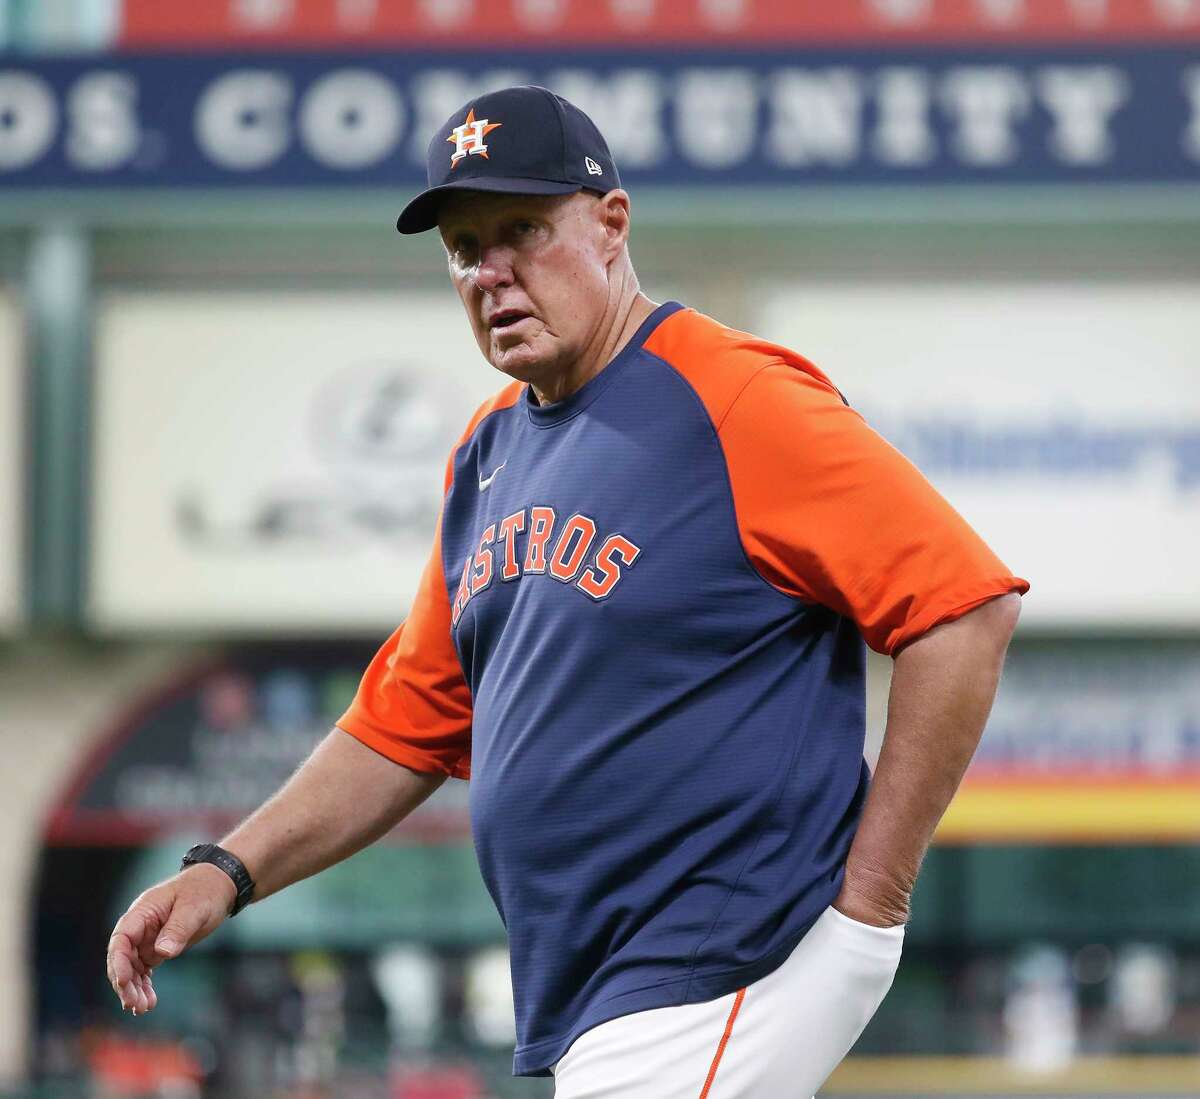 Houston Astros pitching coach Brent Strom (56) walks to the dugout without a mask before the start of an MLB baseball game at Minute Maid Park, Monday, May 10, 2021, in Houston.